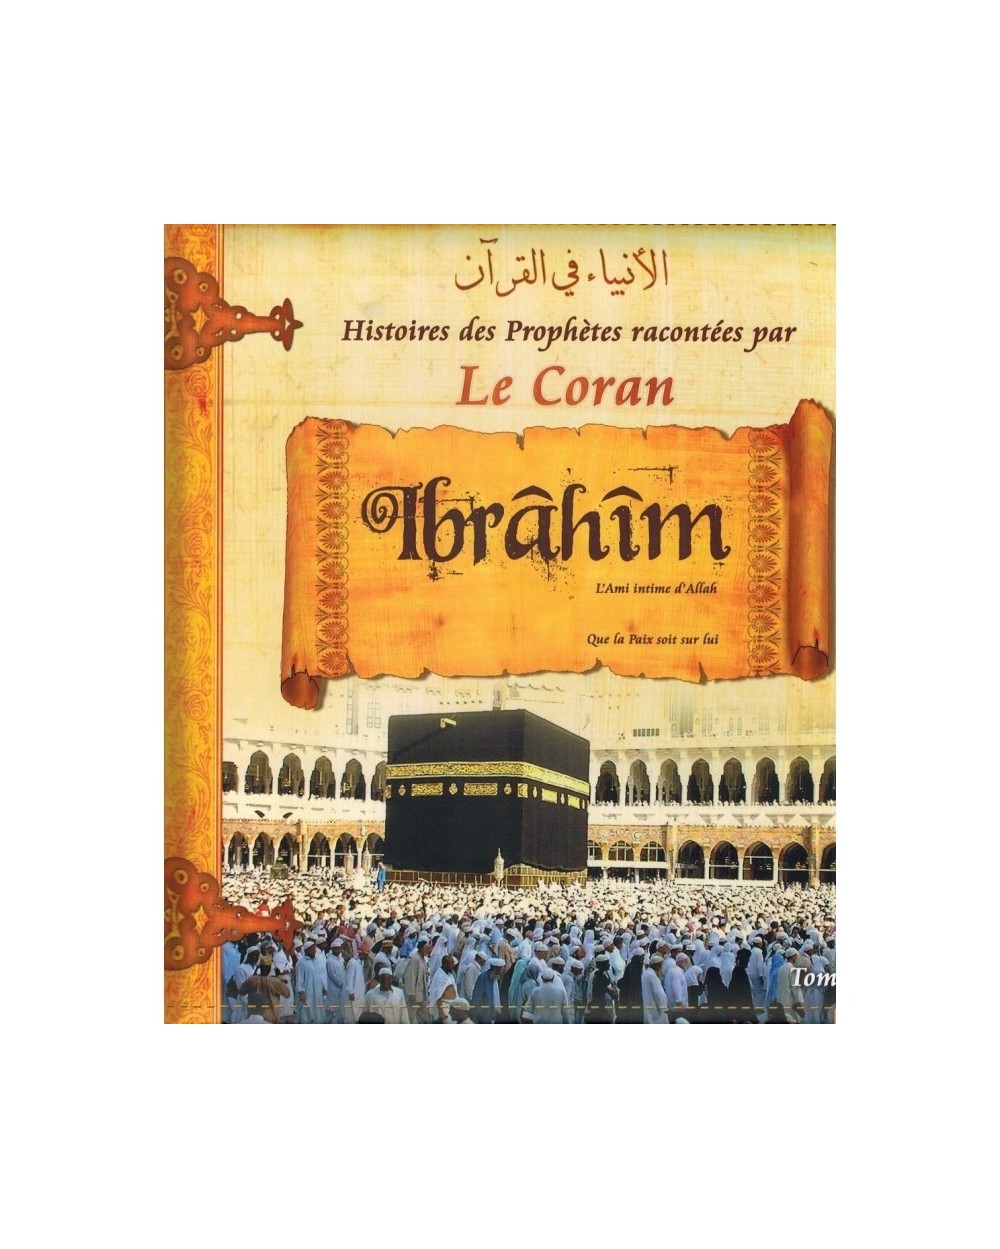 Stories of the prophets told by the Koran - Volume 3 (IBRAHIM)